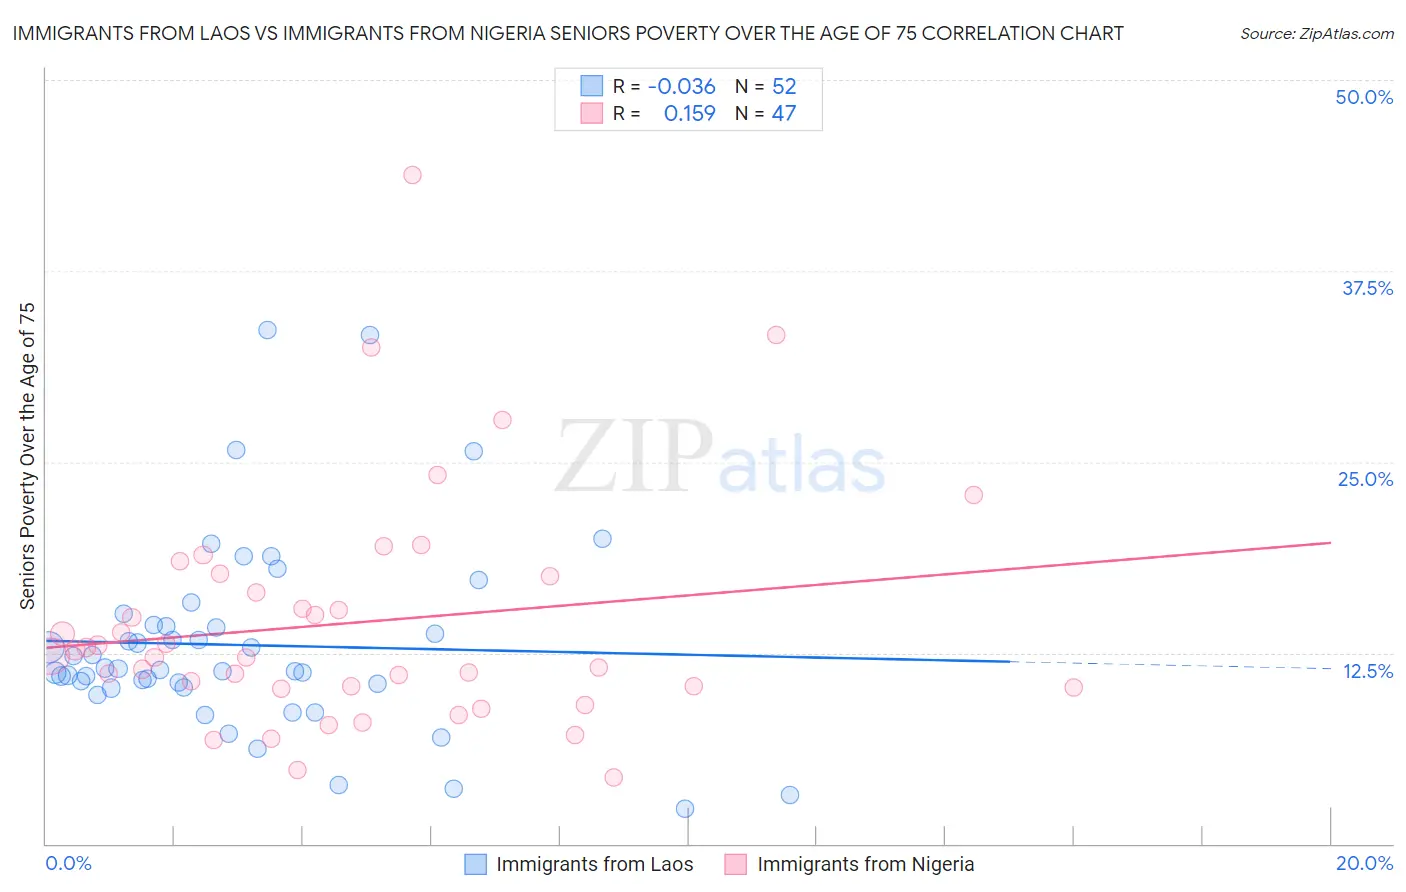 Immigrants from Laos vs Immigrants from Nigeria Seniors Poverty Over the Age of 75